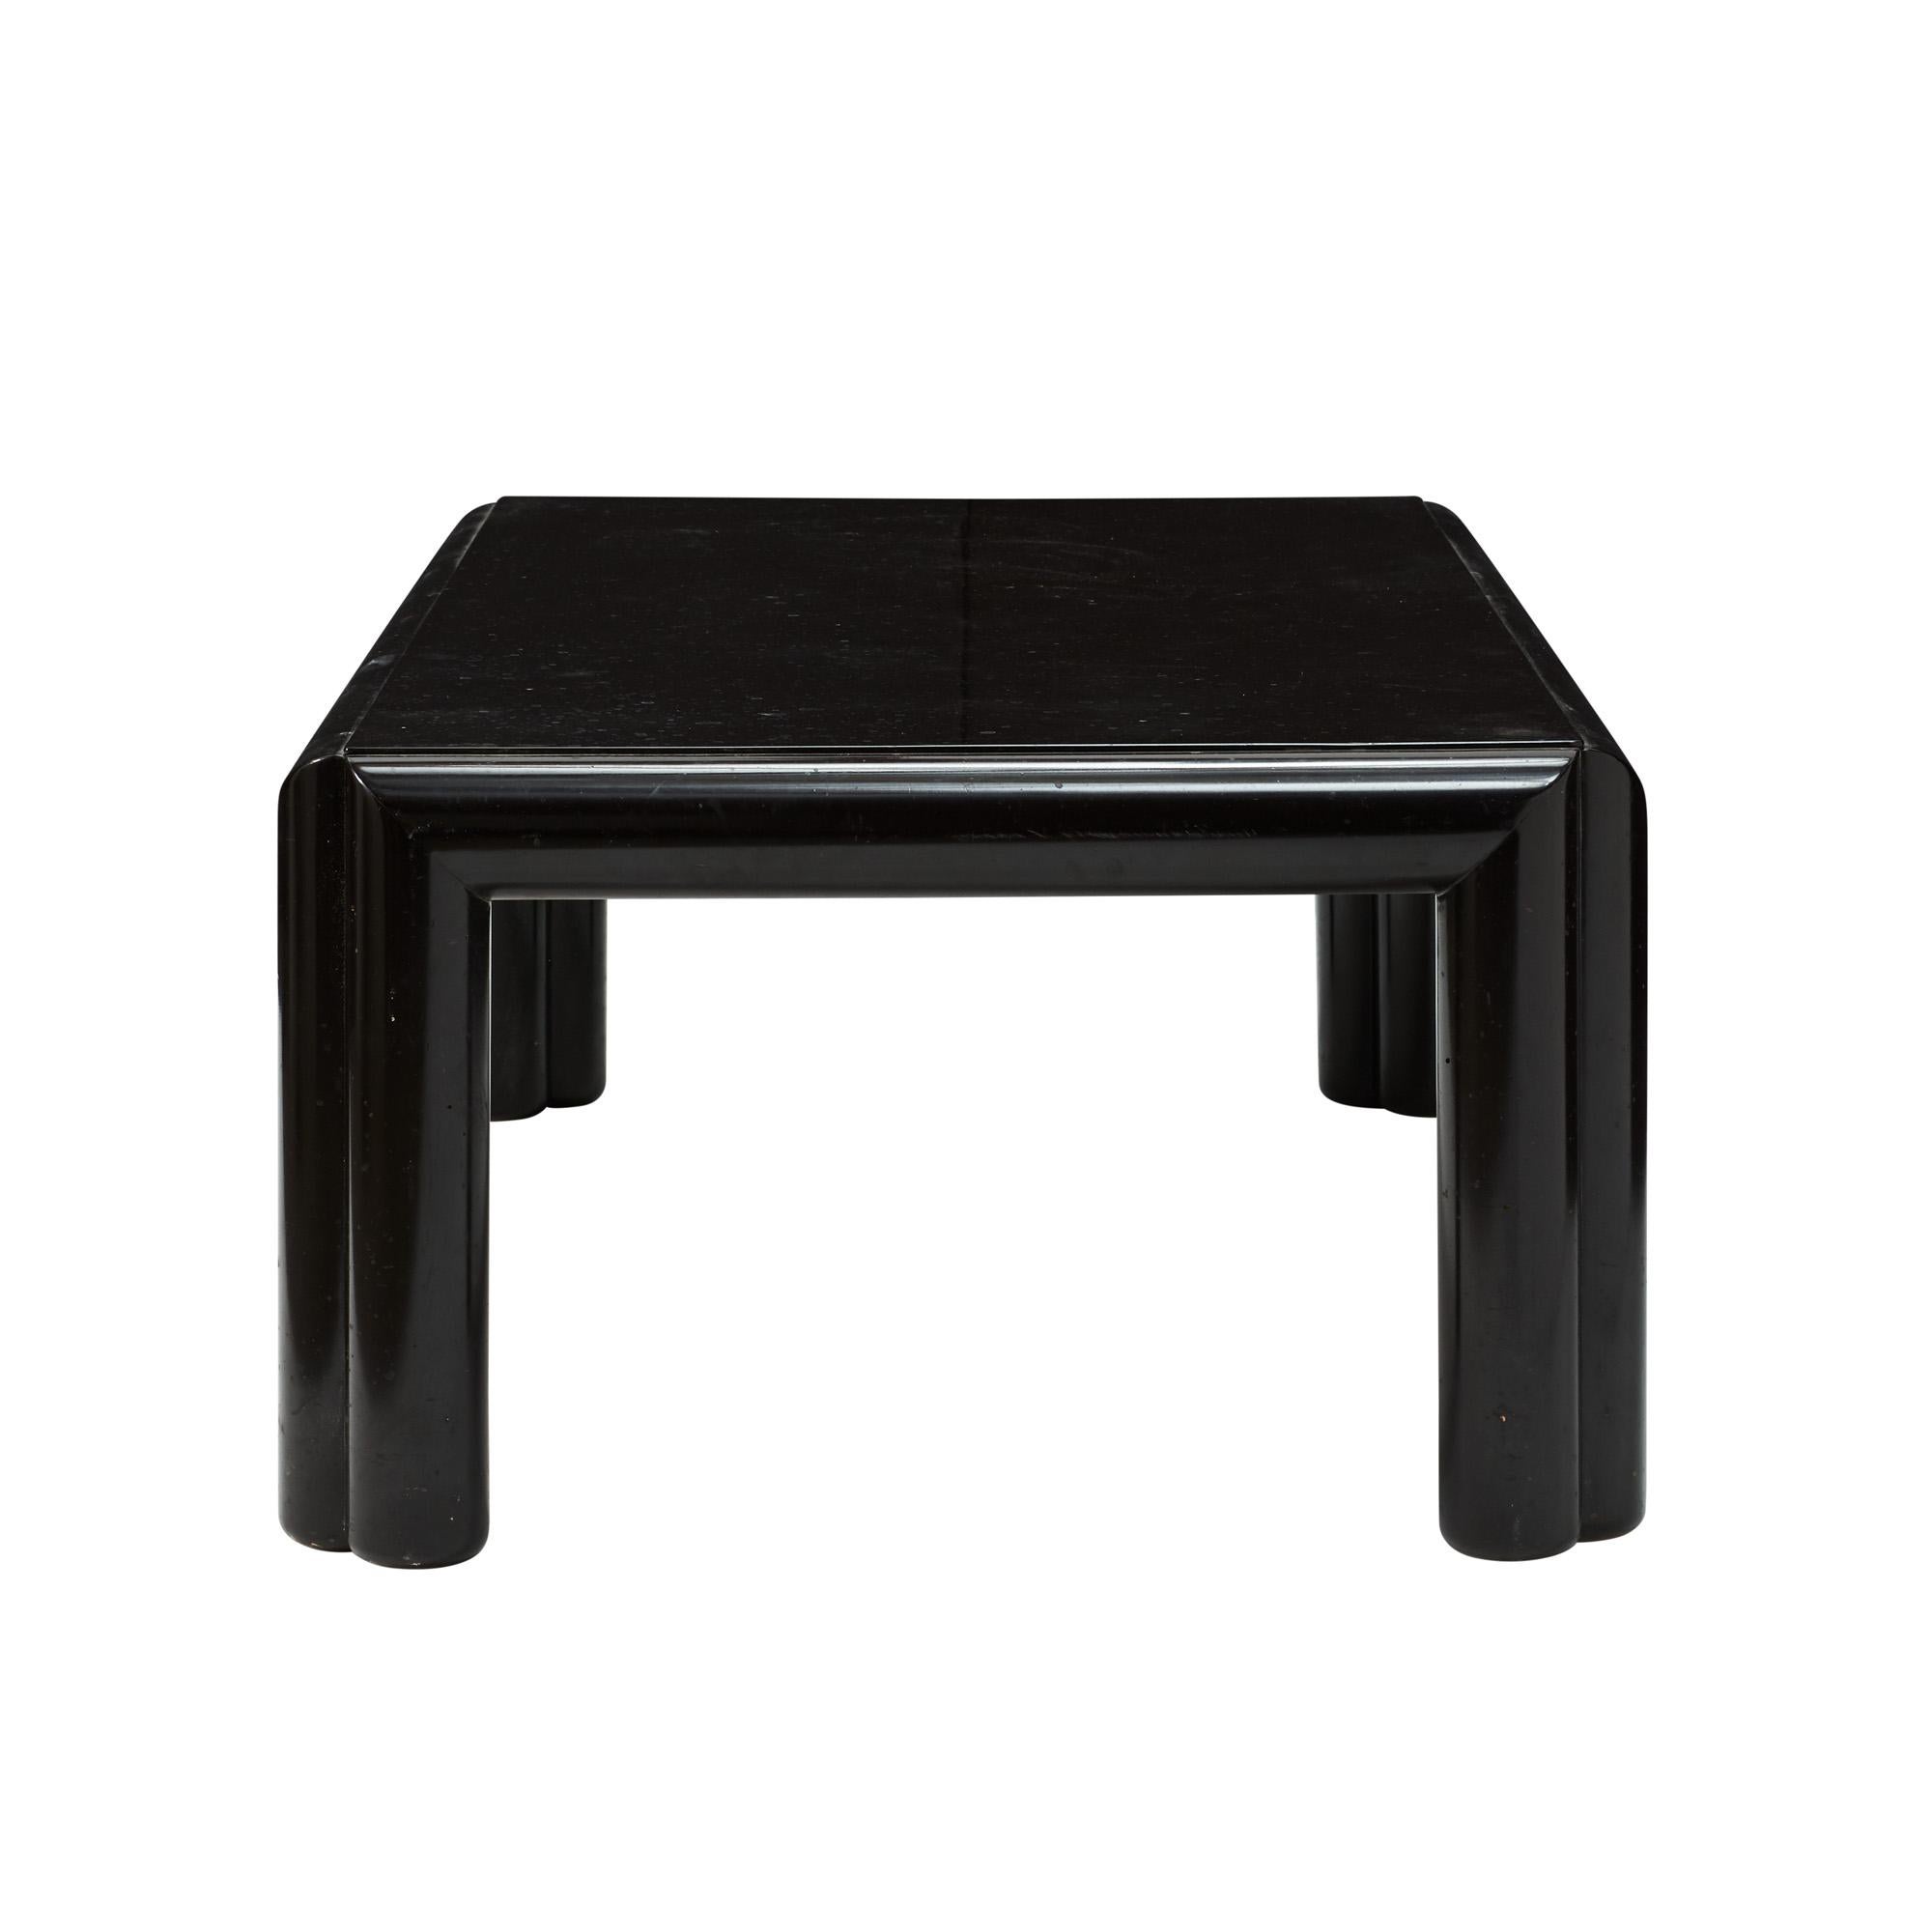 This all black midcentury French lacquer coffee table sits atop four sturdy legs. 

Since Schumacher was founded in 1889, our family-owned company has been synonymous with style, taste, and innovation. A passion for luxury and an unwavering